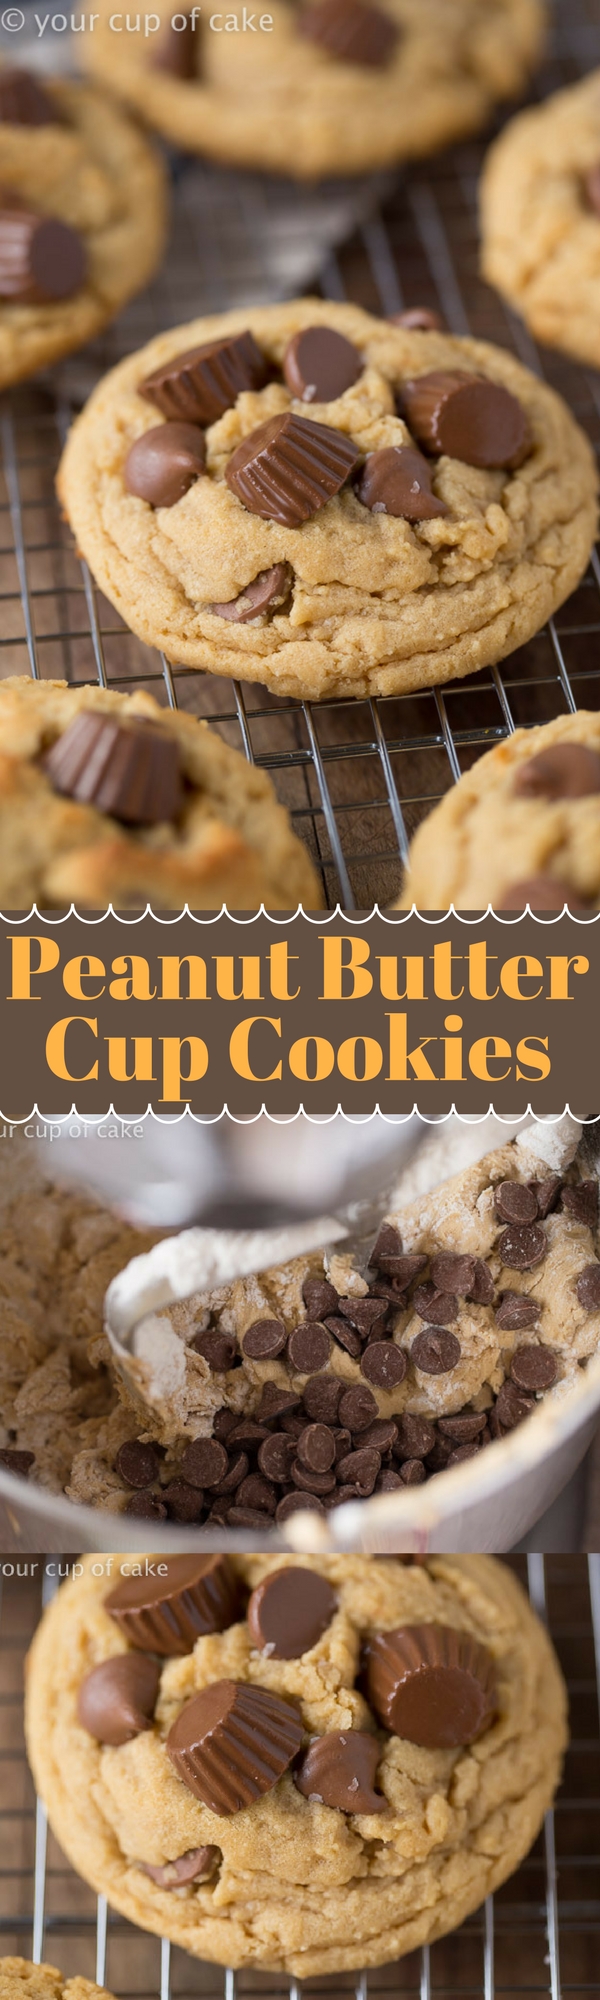 Reese's Peanut Butter Cup Cookies for peanut butter lovers! 